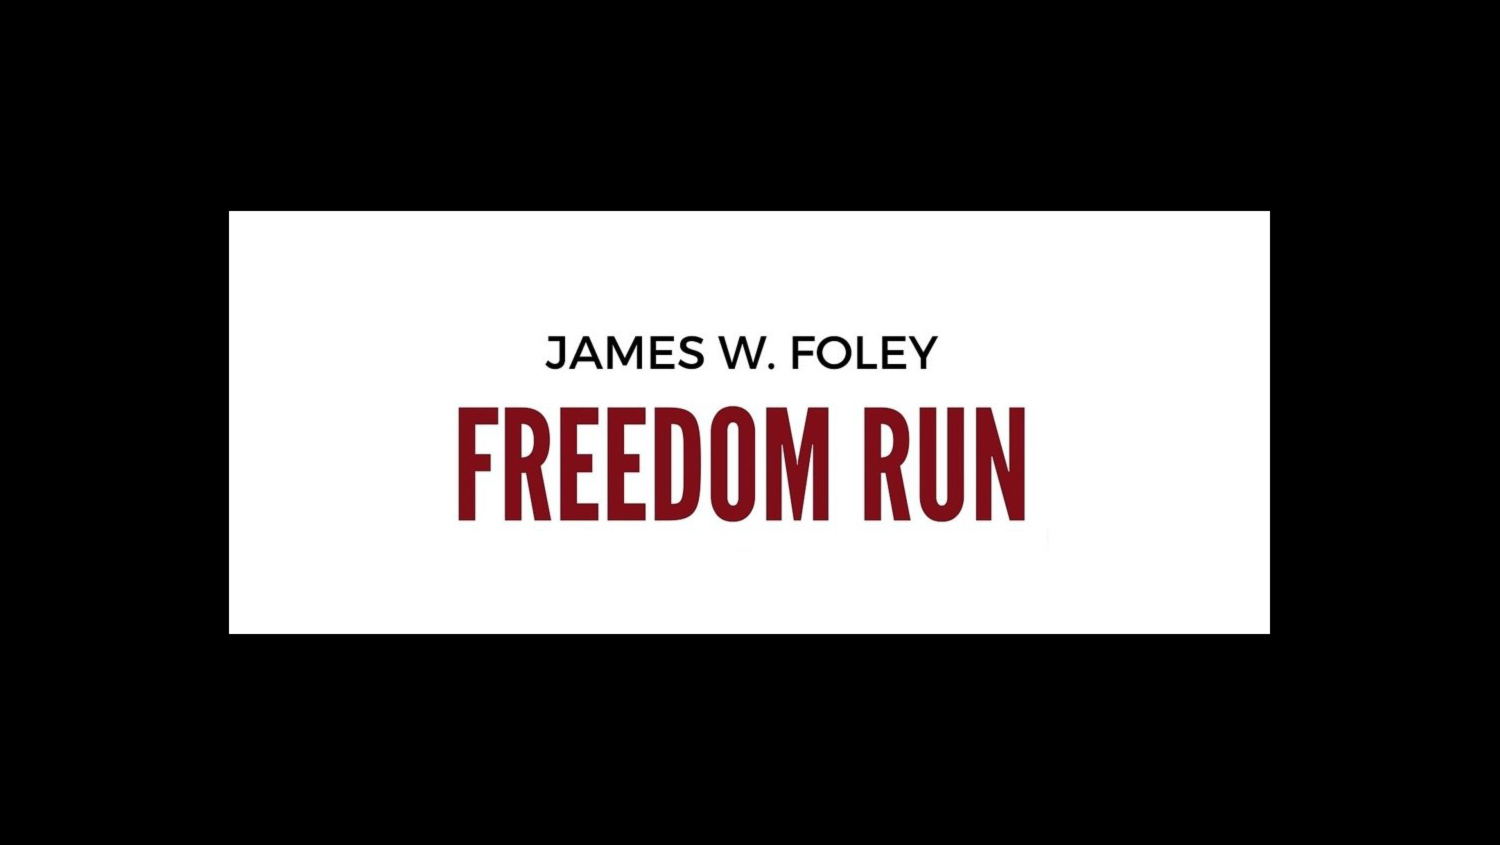 Ninth Annual James W. Foley Freedom Runs to Be Held in Milwaukee, Madison; Across United States